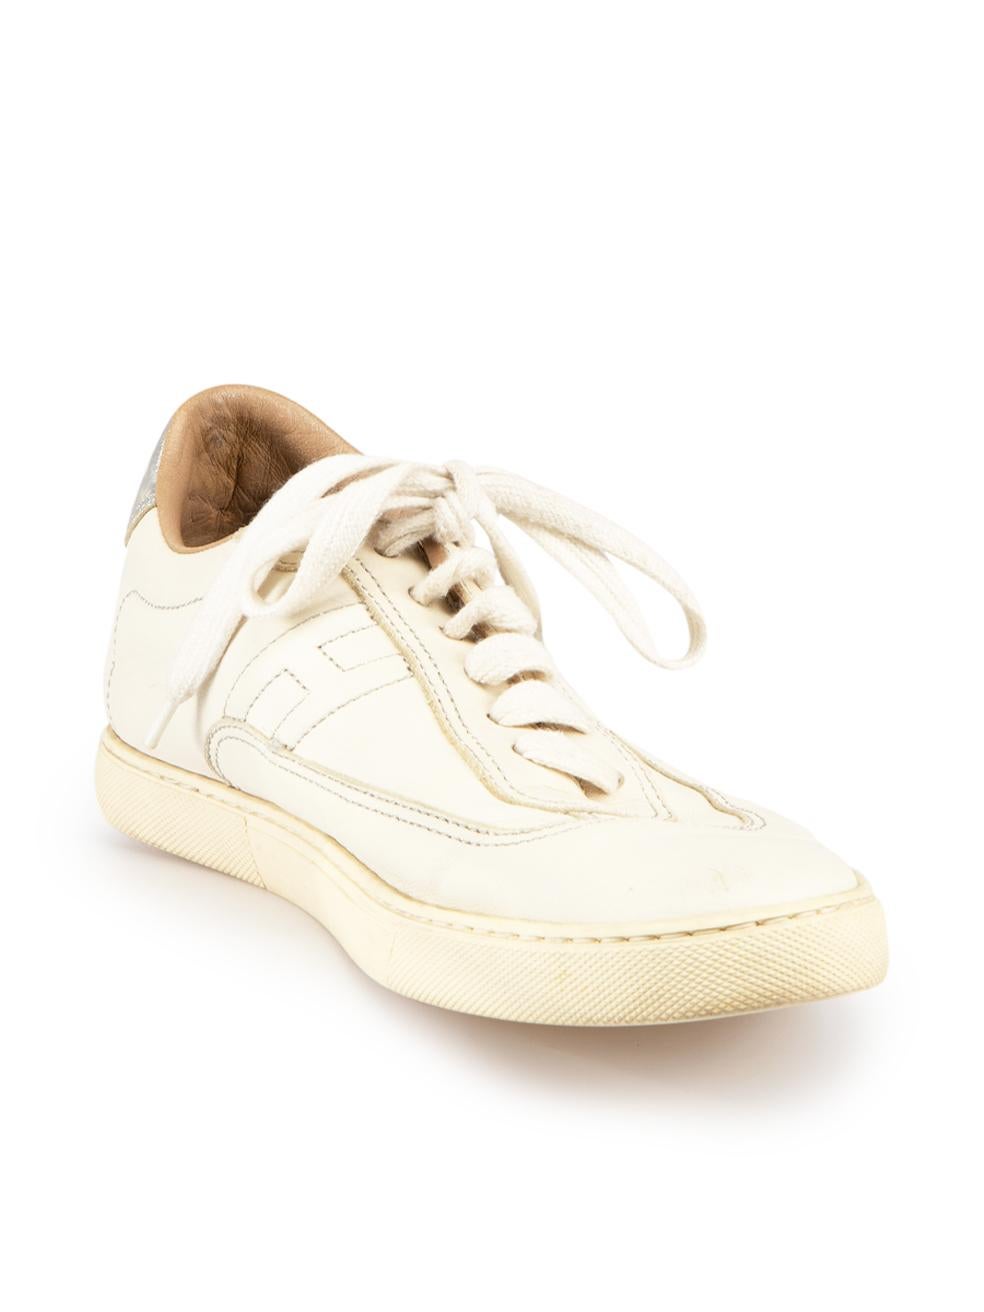 CONDITION is Very good. Minimal wear to trainers is evident. Minimal wear to rubber sole and back of left shoe where stains and scratches is evident. Minor discolouration is visible on cotton laces this used Herm√®s designer resale item.
